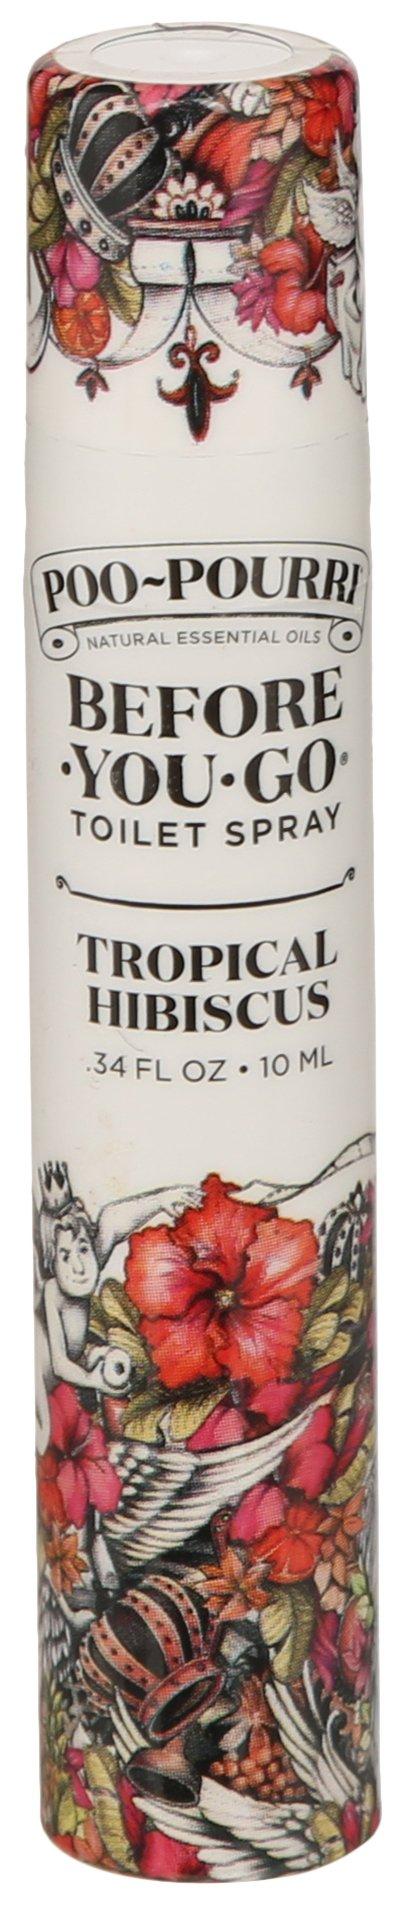 Tropical Hibiscus Before You Go Toilet Spray